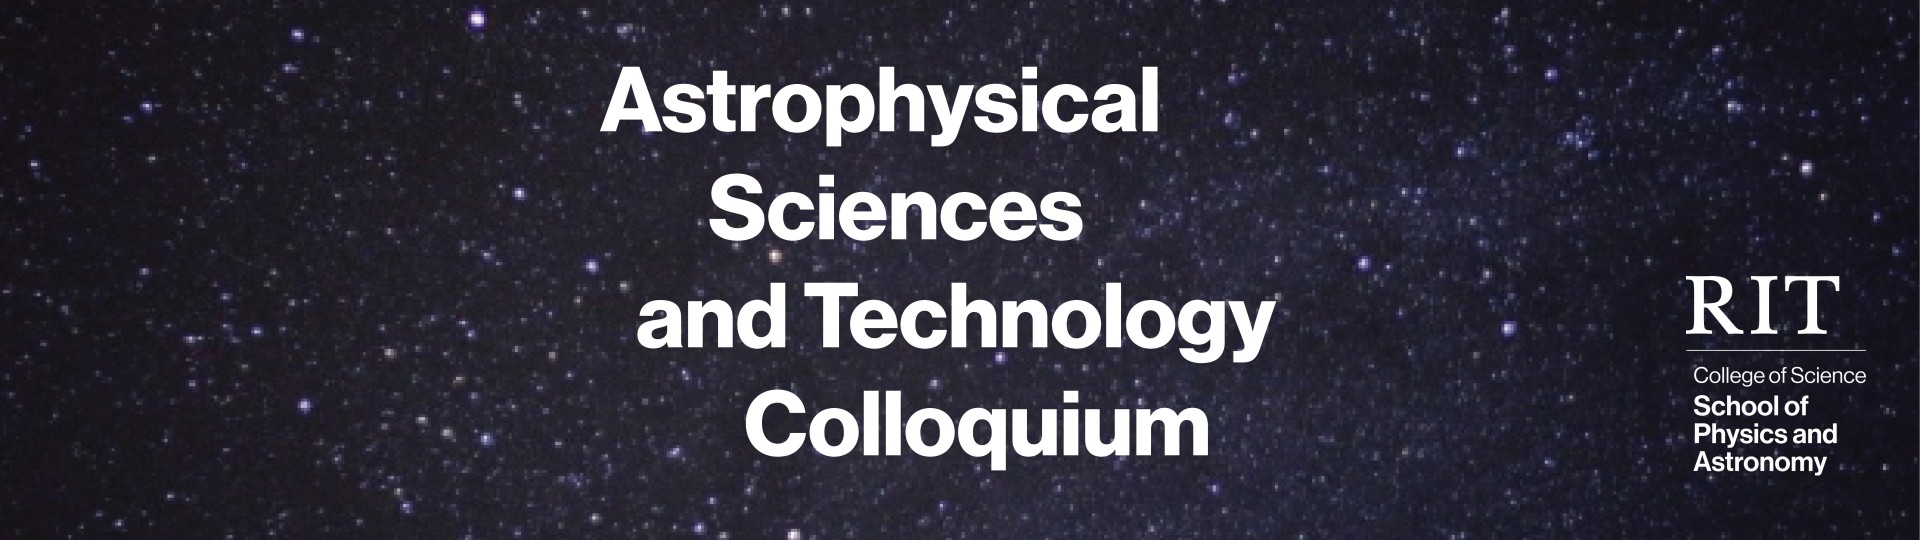 astrophysical sciences and technology colloquium banner